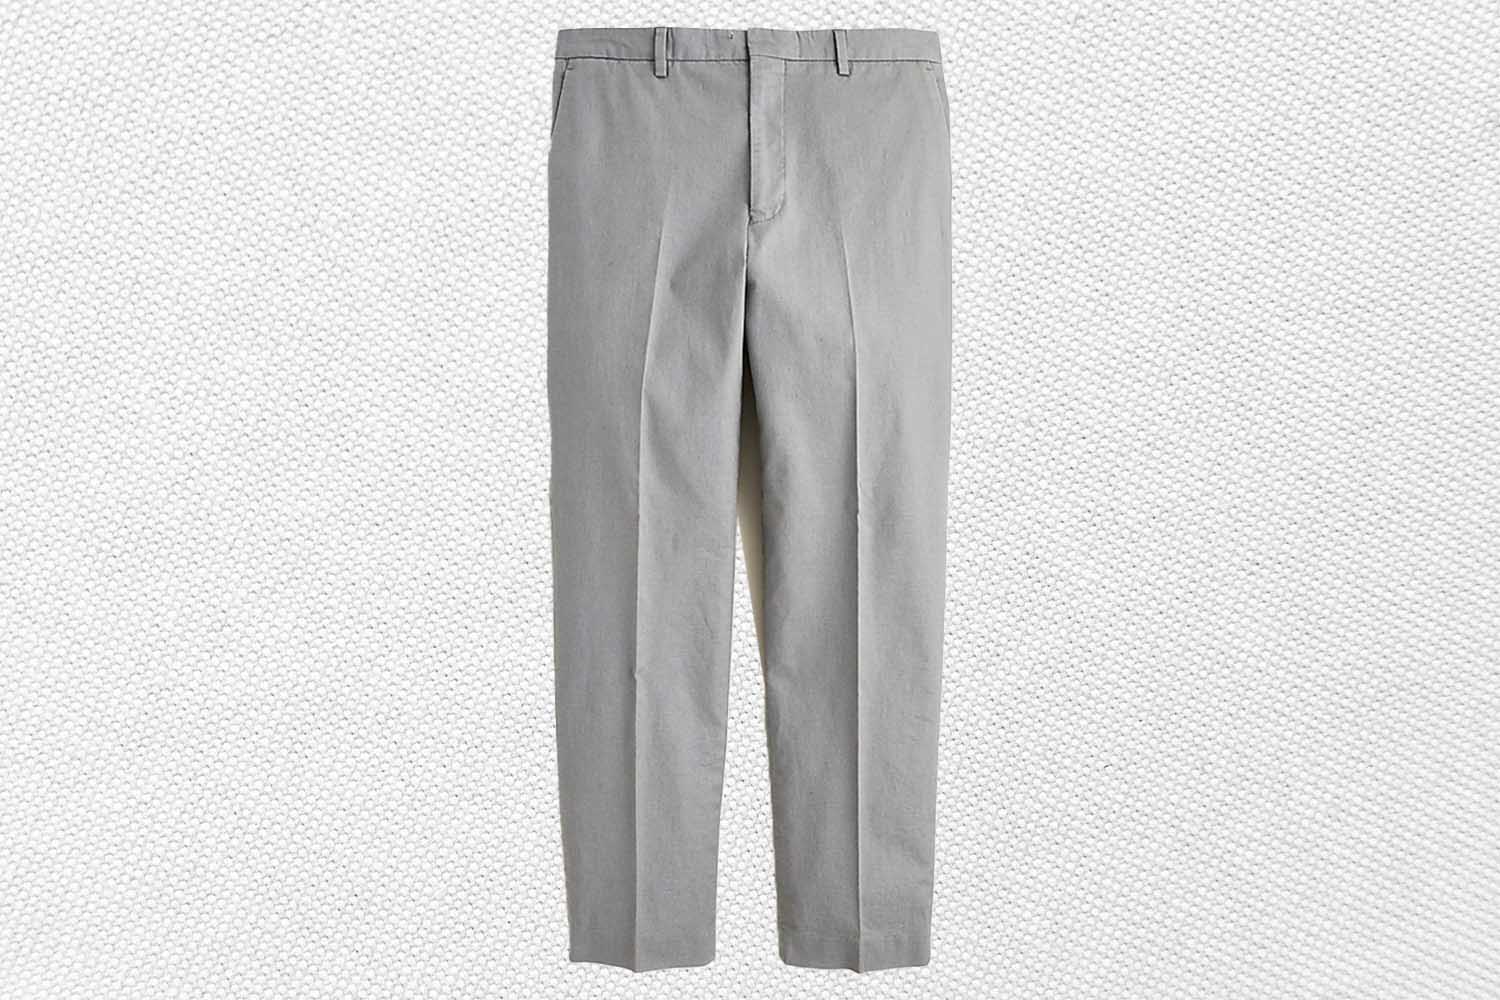 a pair of grey suit pants from J.Crew on a grey background